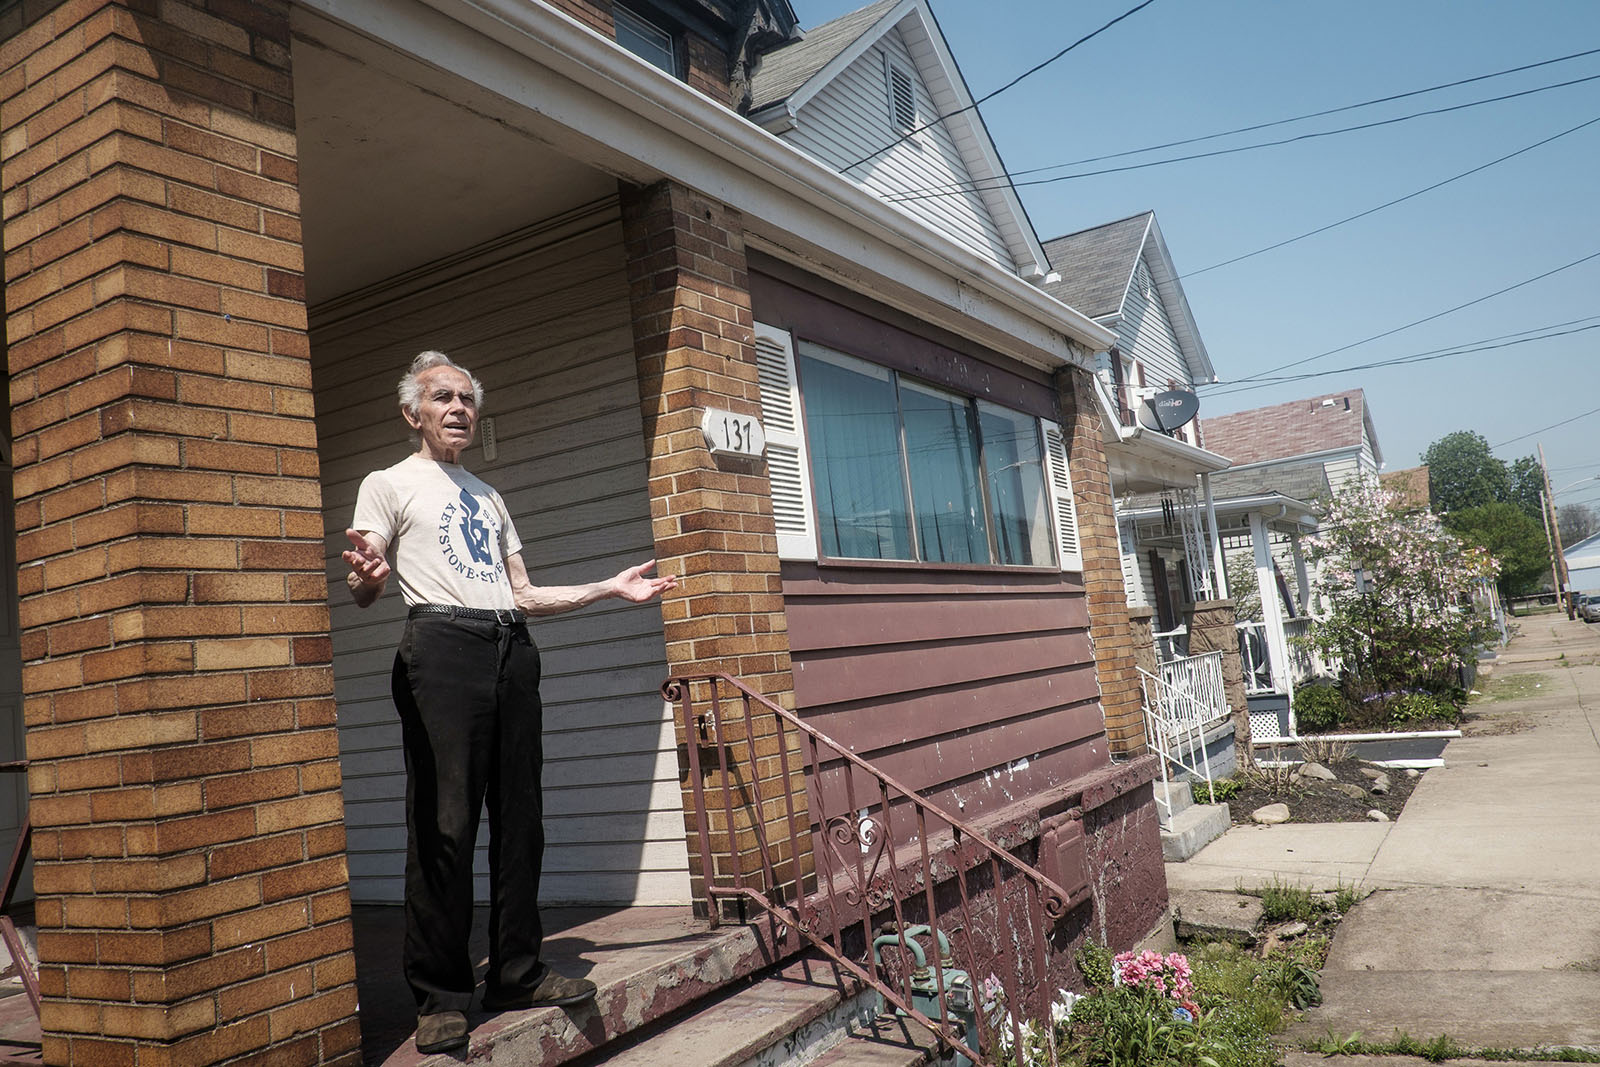 An elderly man stands outside his home, arms outstretched as he talks to the camera.